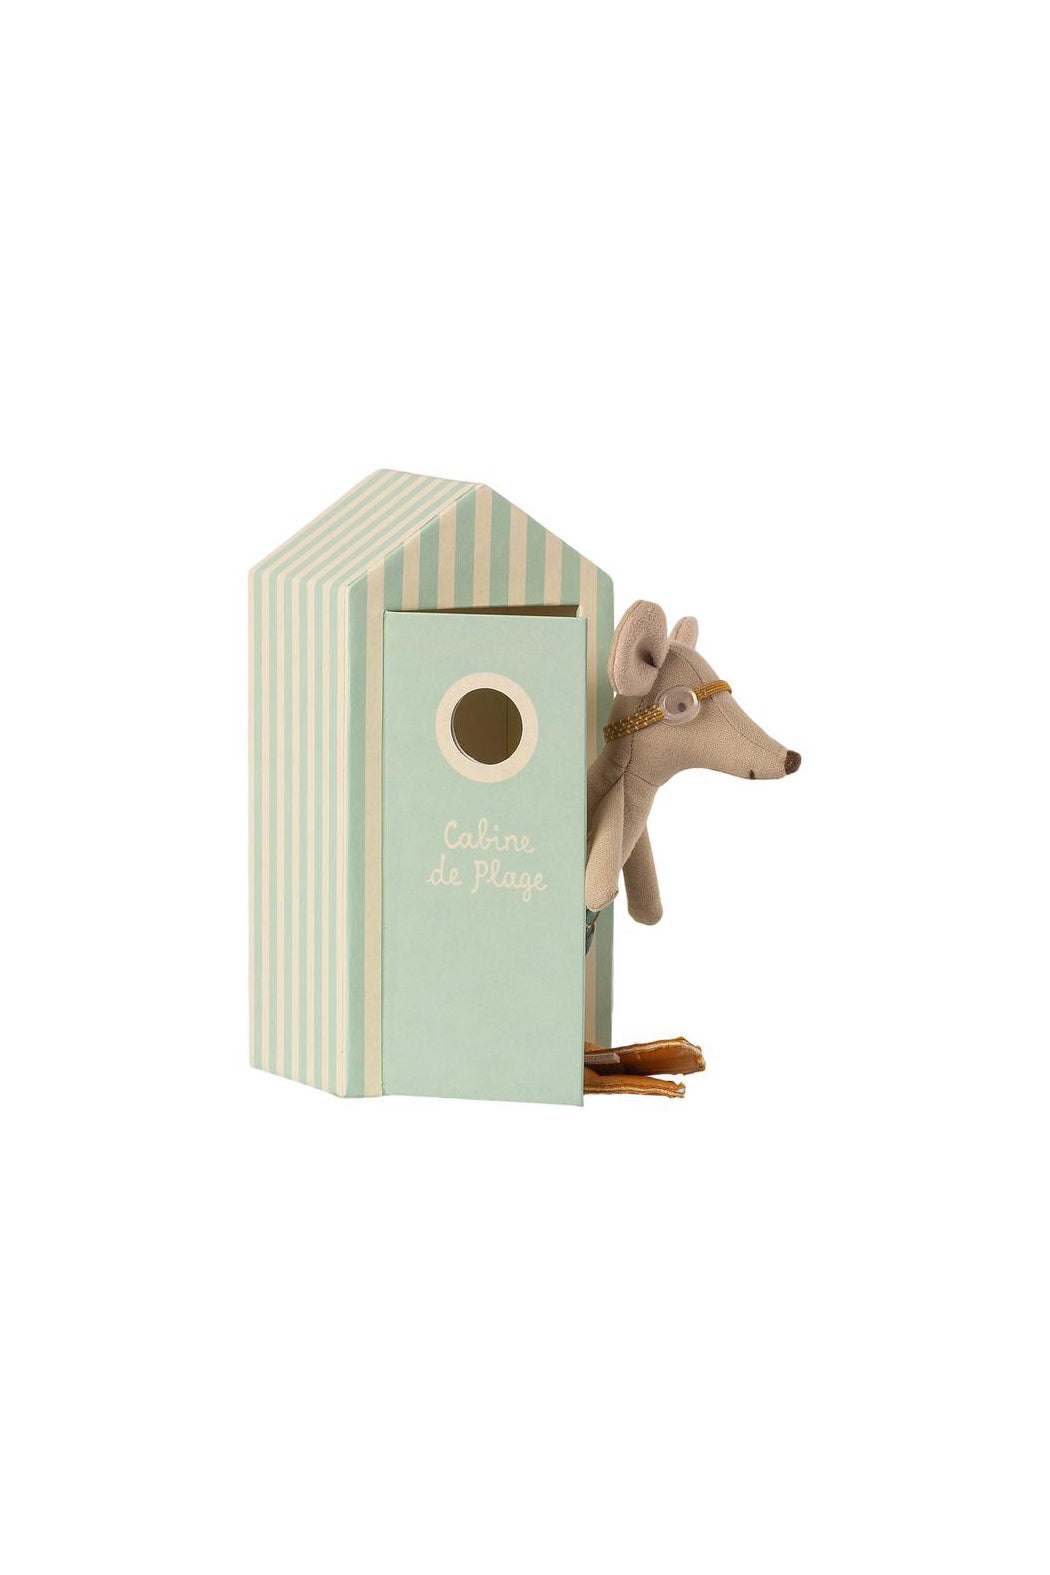 Maileg Beach Mice - Big Brother Mouse In Cabin De Plage